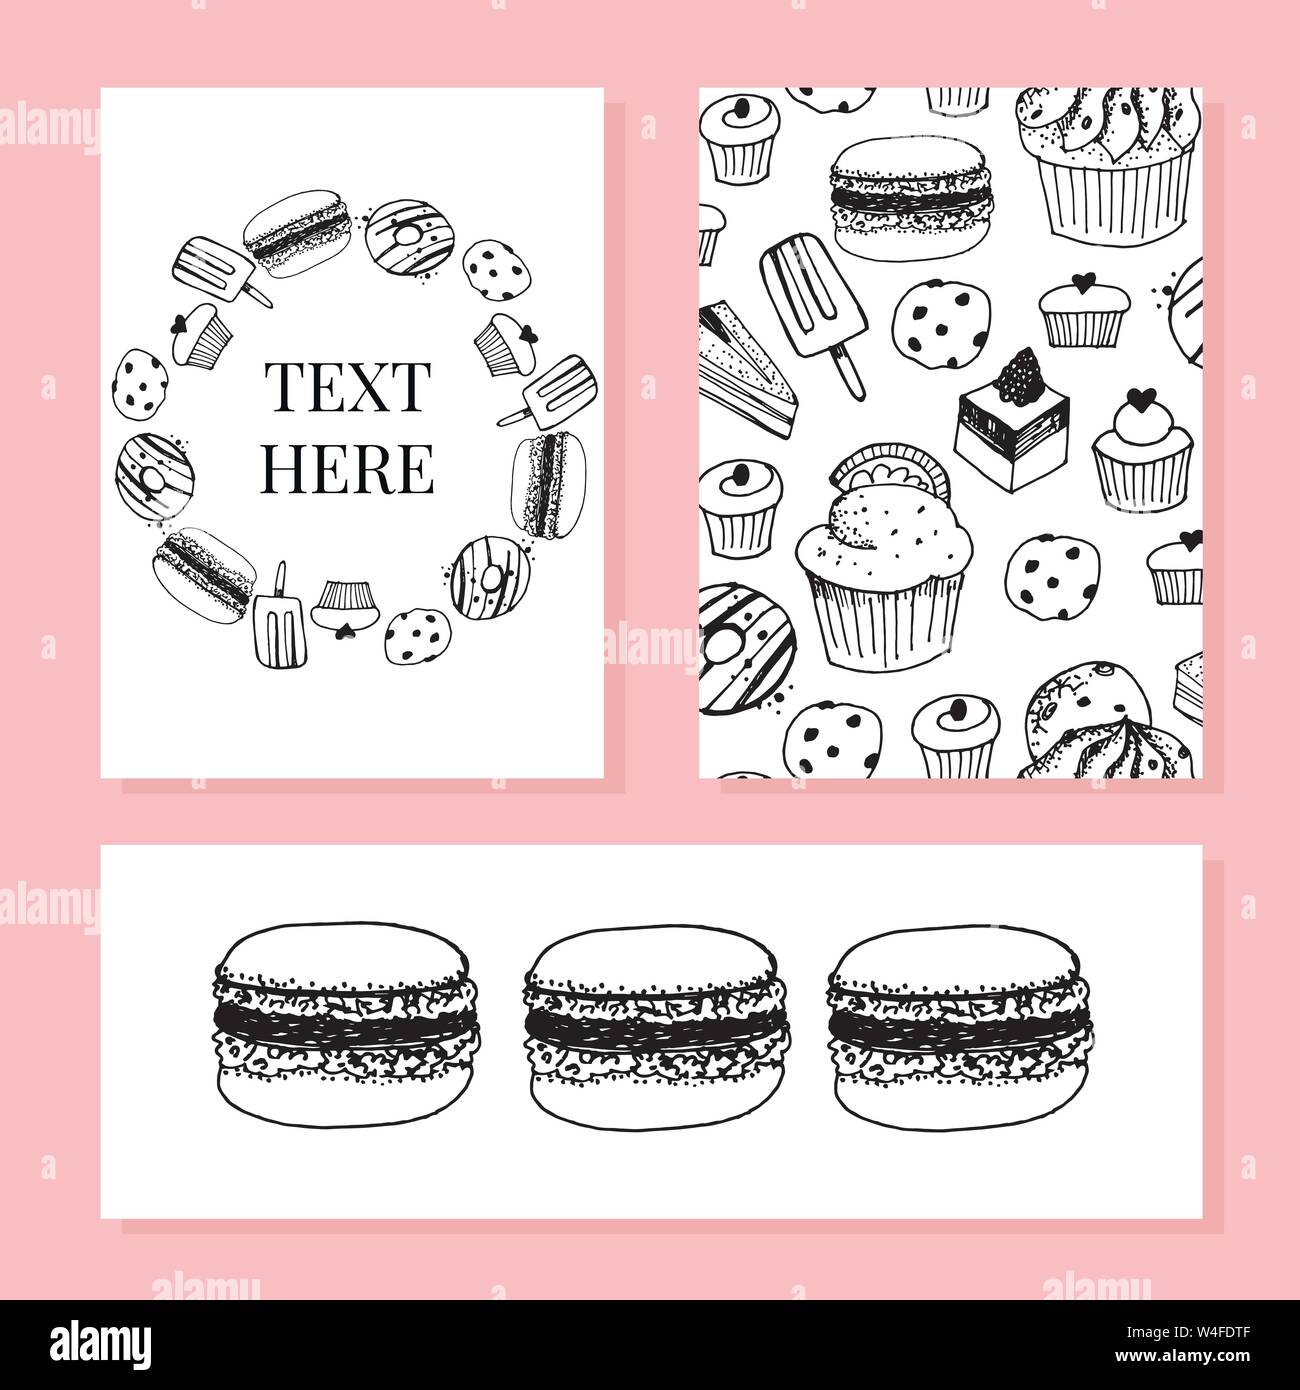 Bakery, pastry sweets and desserts vector banners with cakes and cupcakes, muffins, pies and tarts, vanilla biscuit puddings. Design for baker shop, c Stock Vector